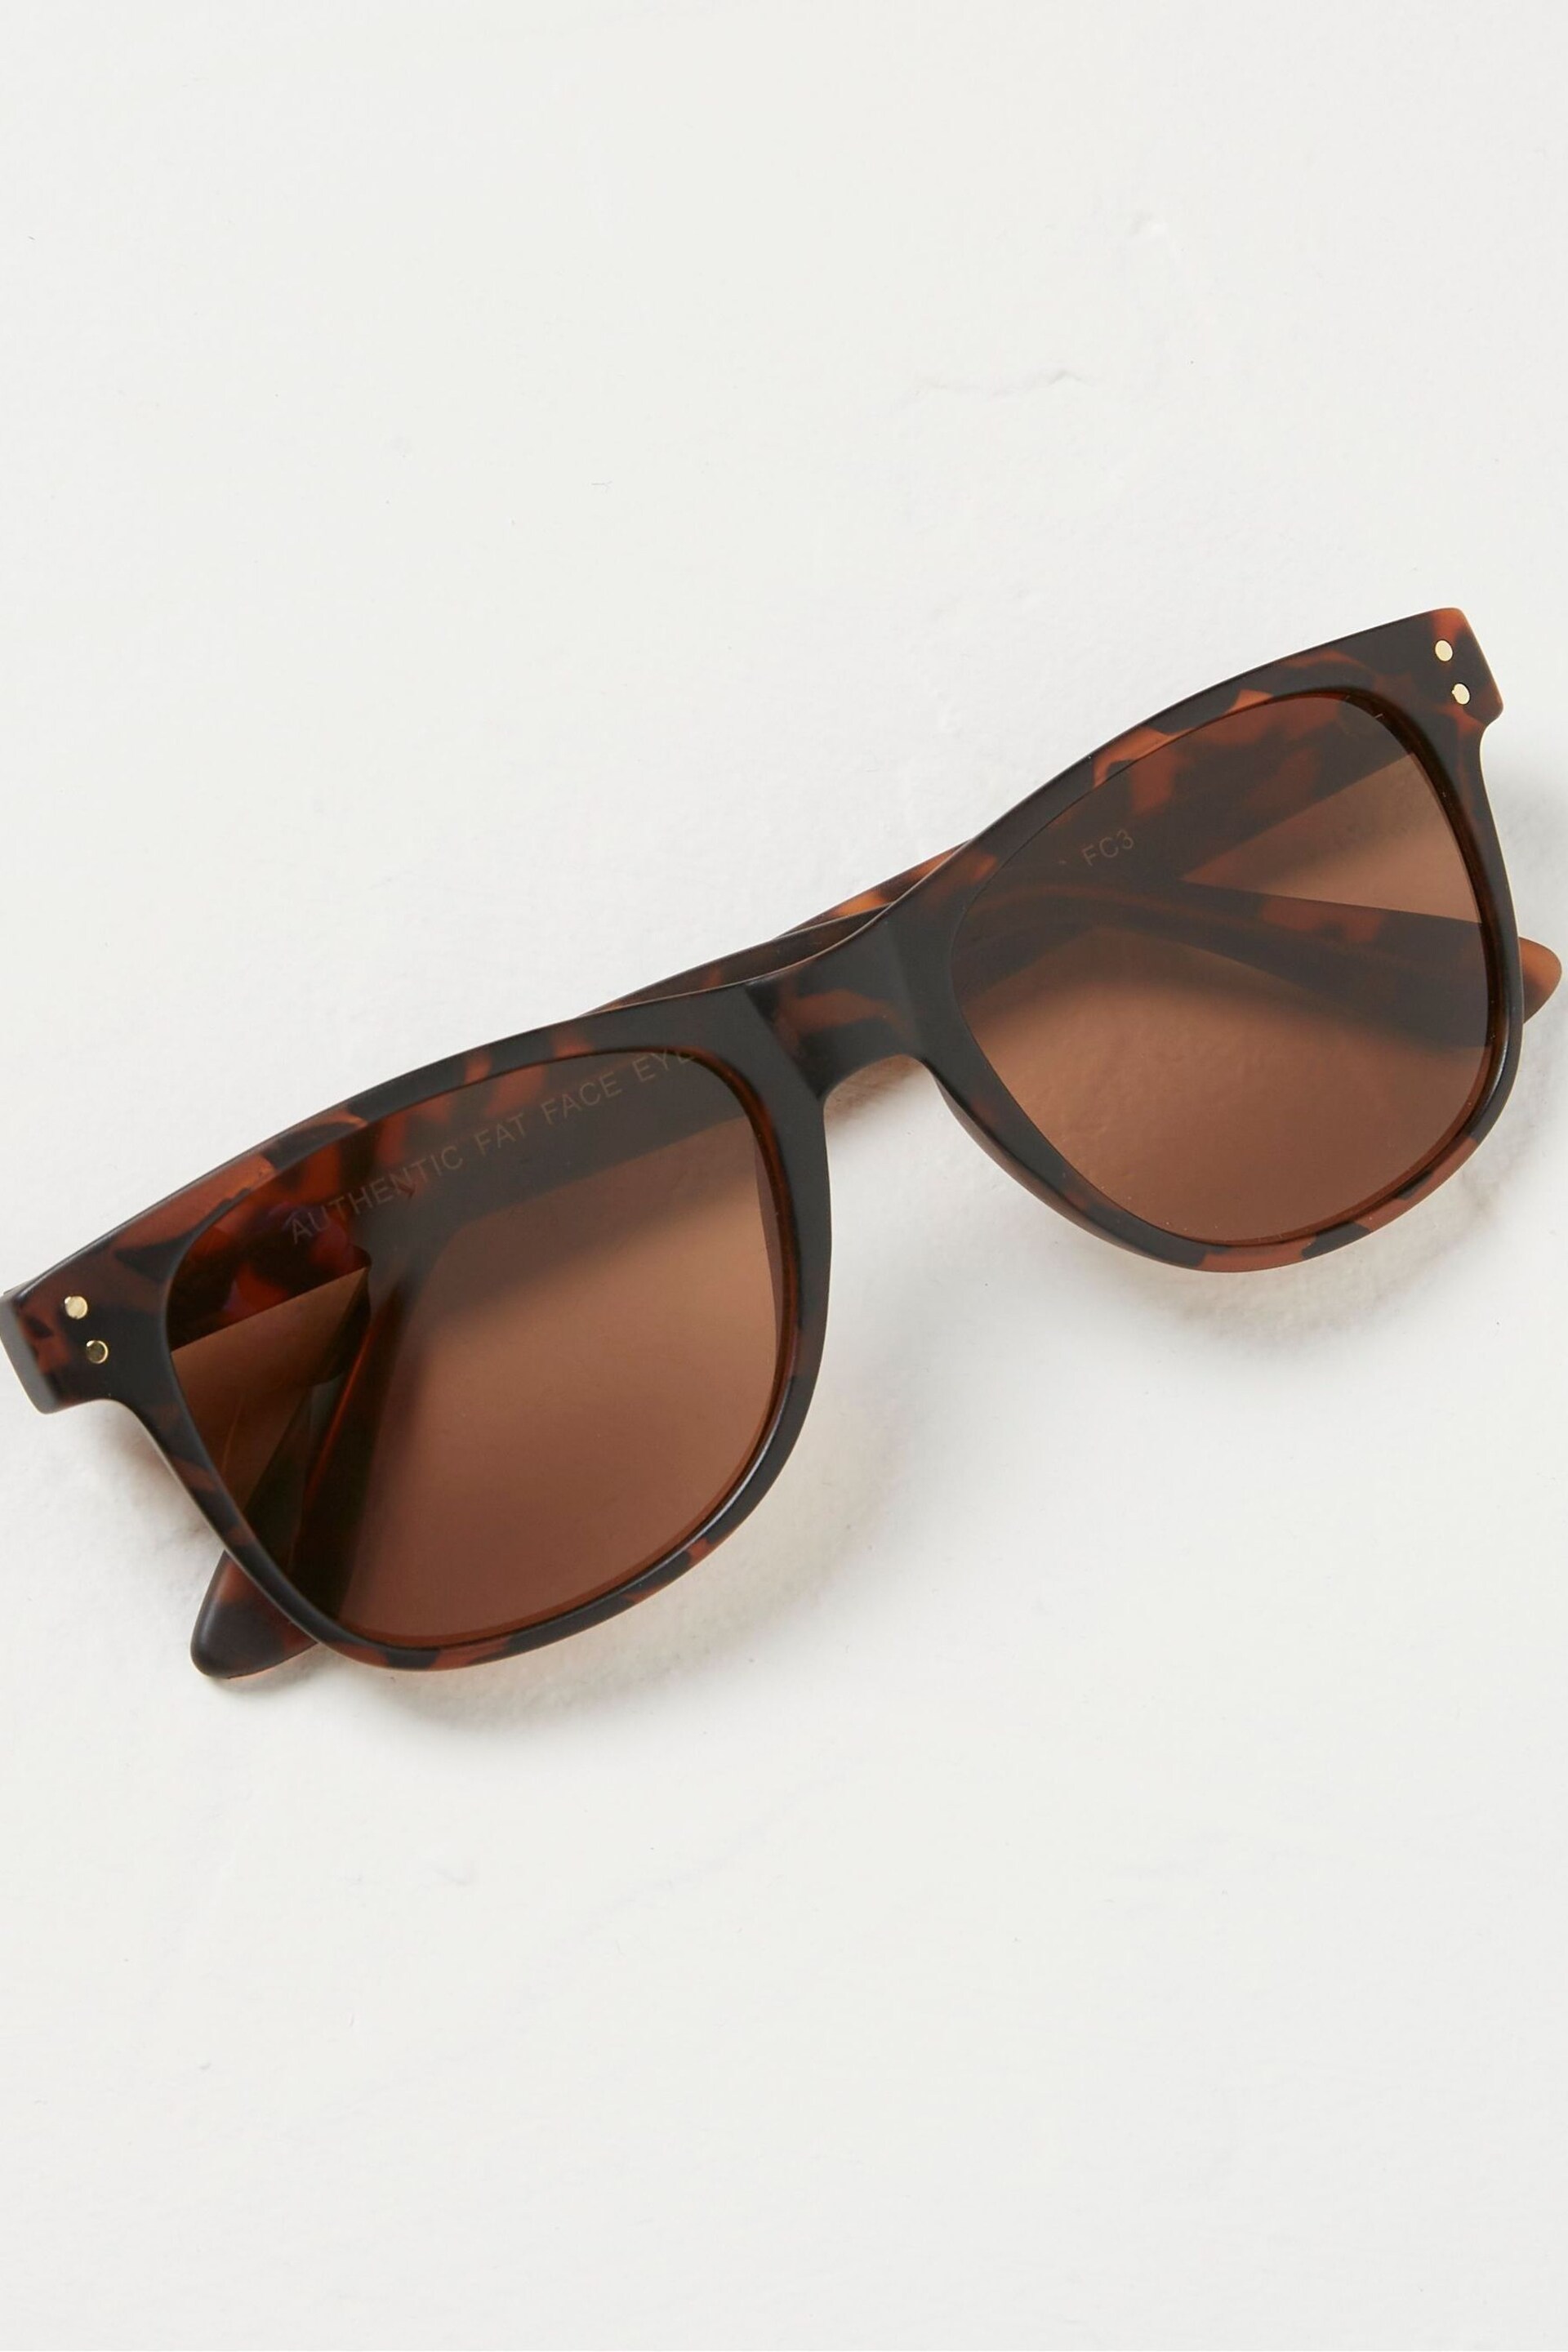 FatFace Brown Theo Sunglasses - Image 2 of 2